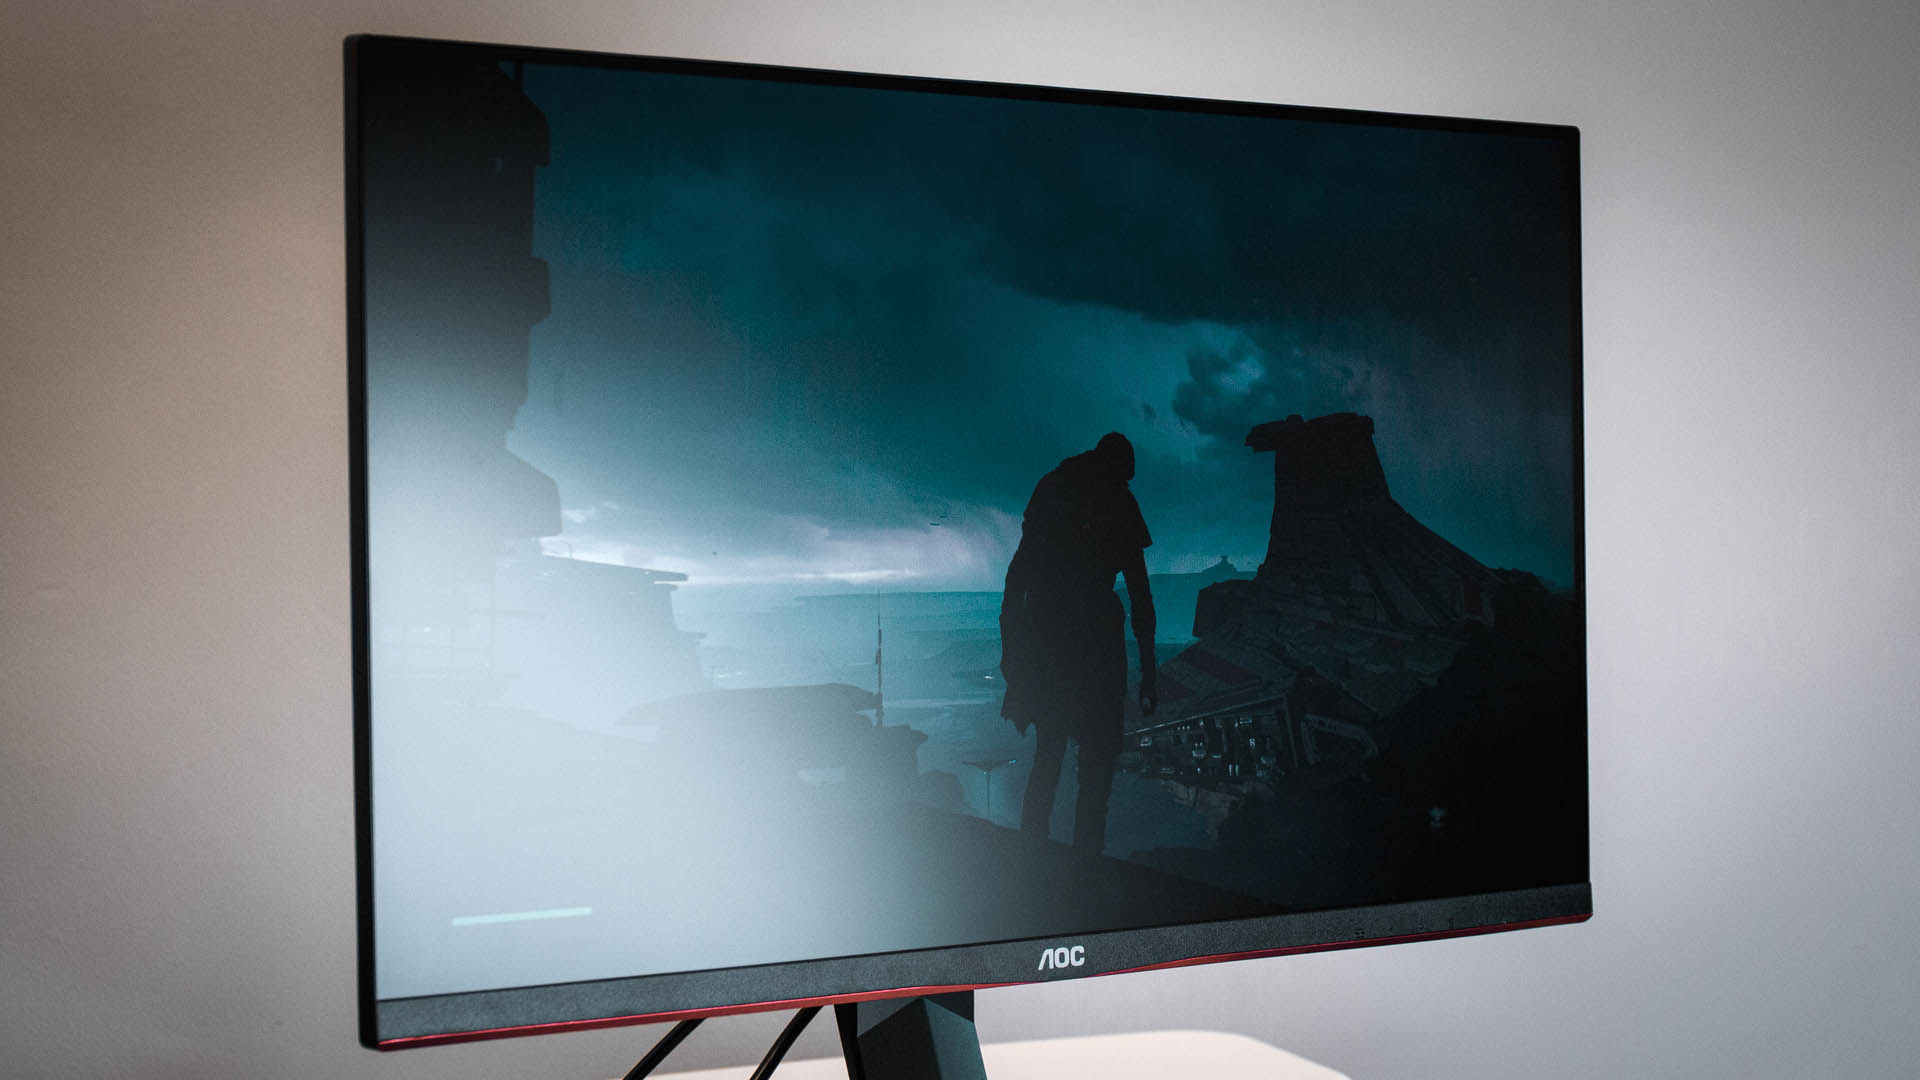 AOC Gaming C27G2AE review: fighting the good fight for curved budget  monitors